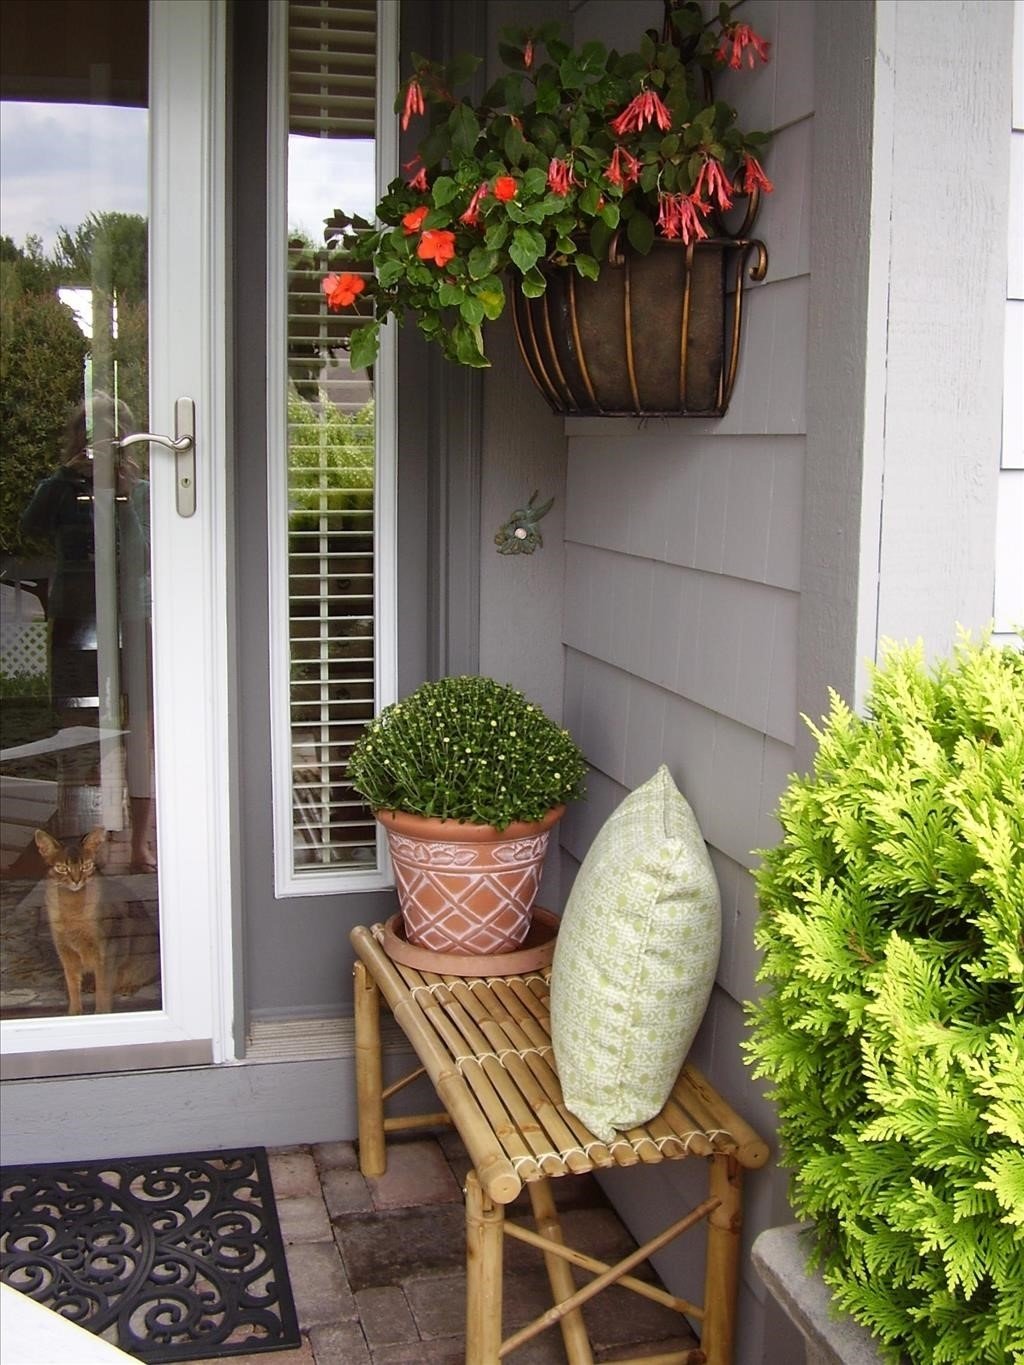 10 Spectacular Small Front Porch Ideas Pictures exterior efficient small front porch ideas marvellous small front 2022